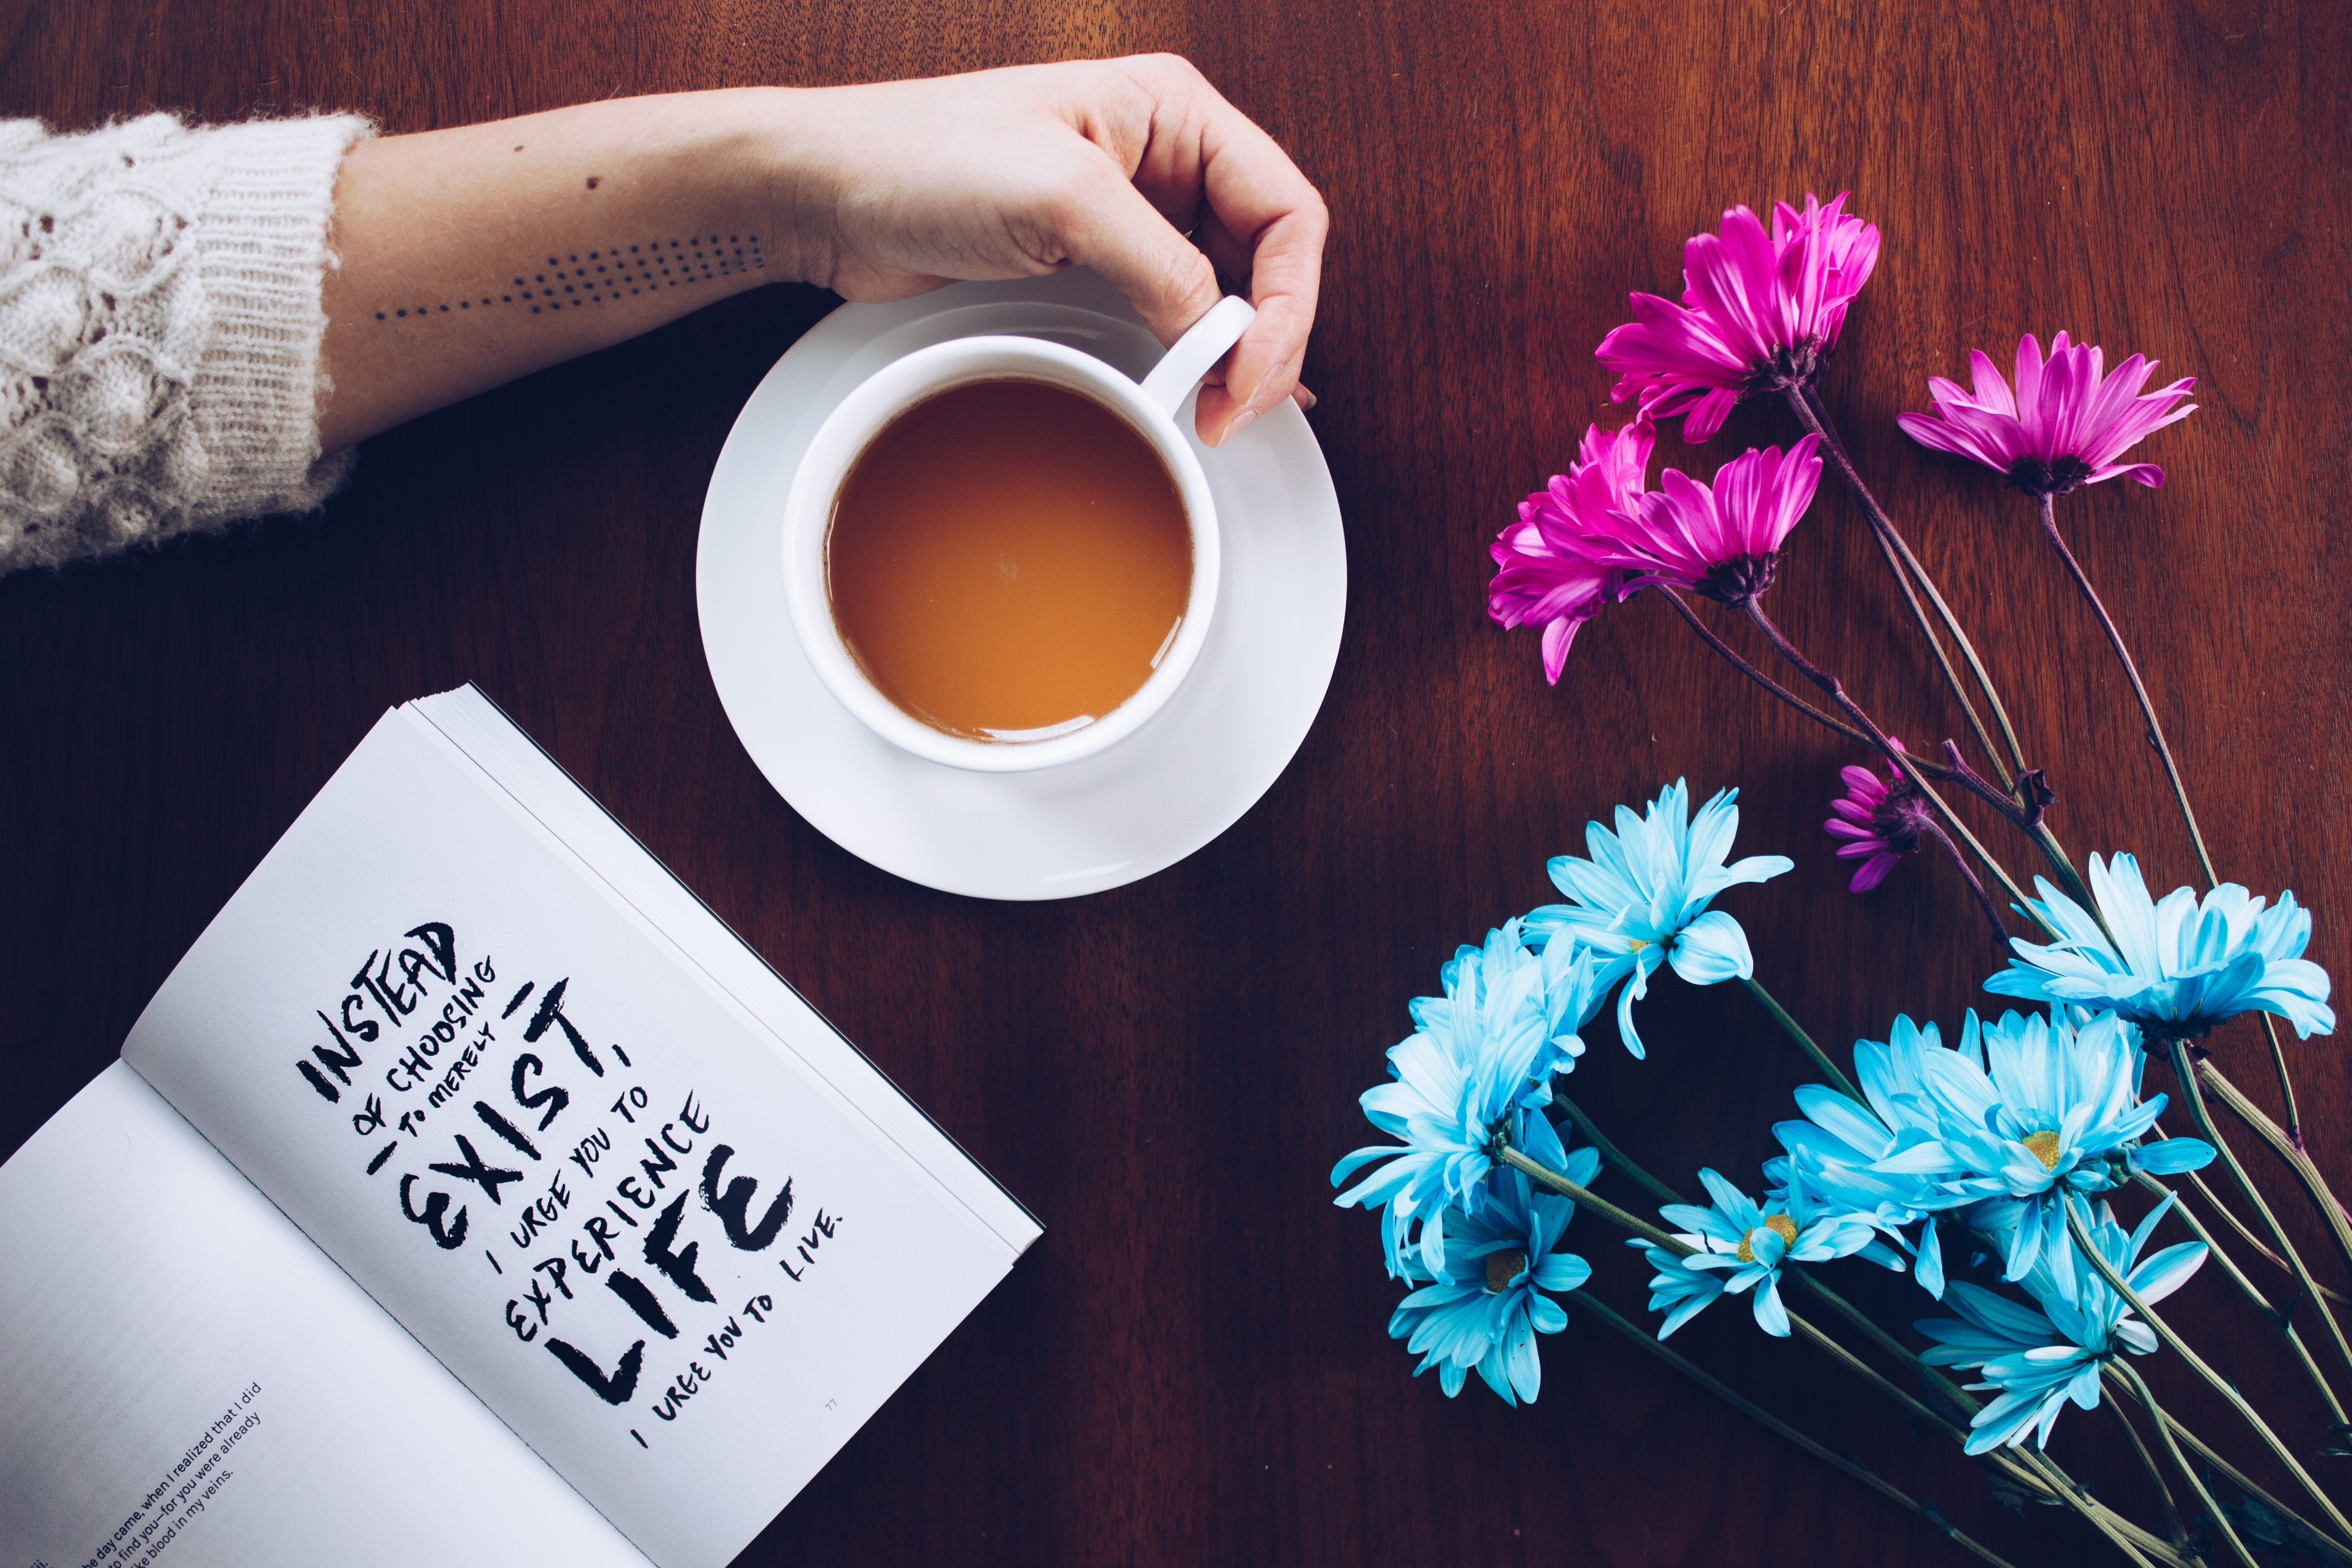 A person holding a cup of coffee beside a book and flowers